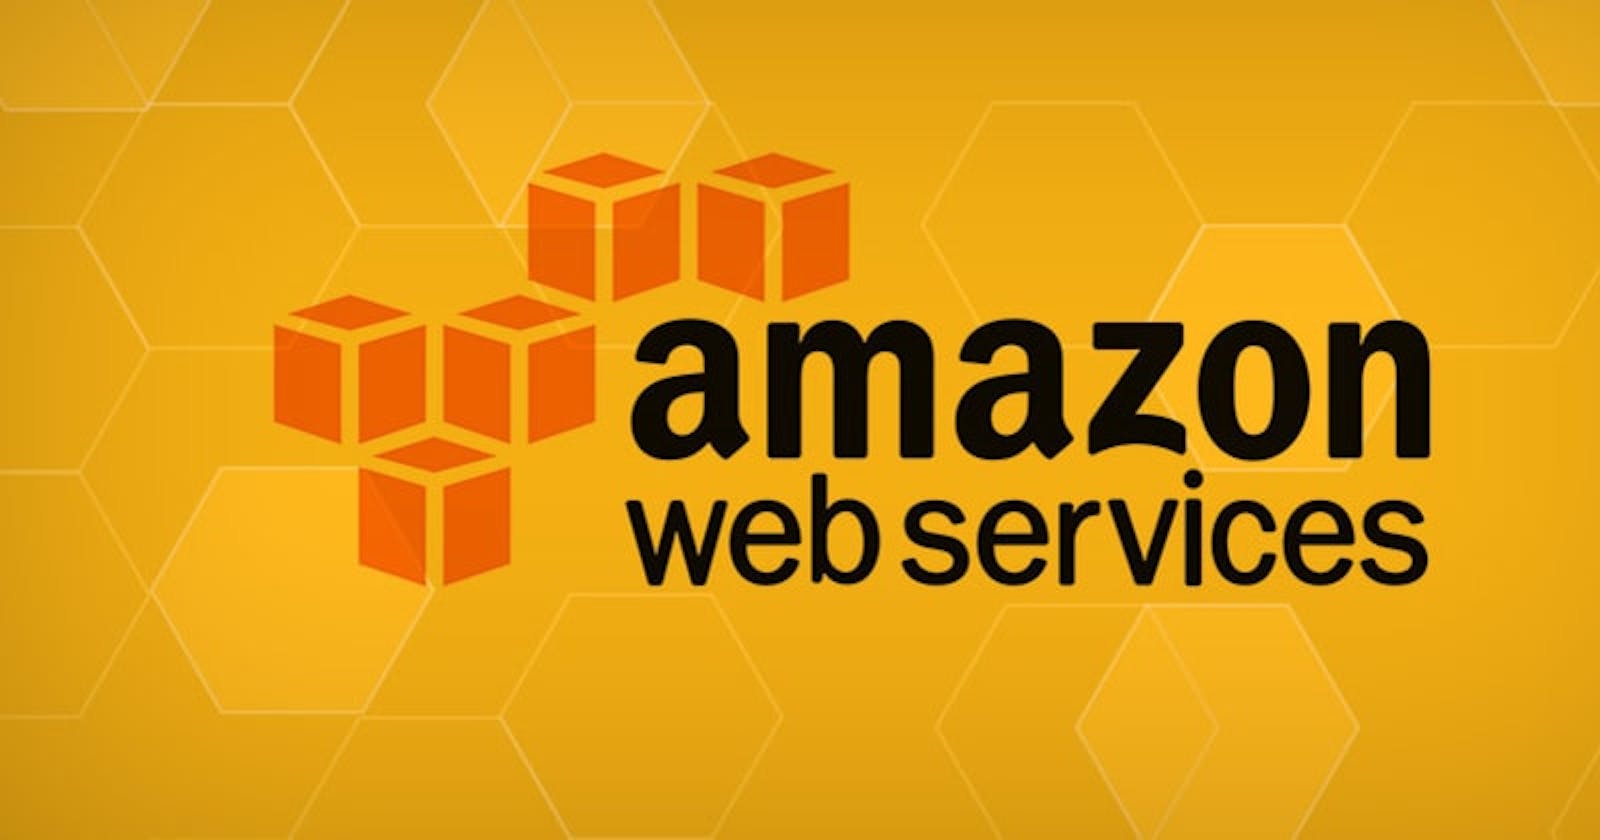 Why Did We Start Using AWS Secrets Manager To Store Sensitive Data?